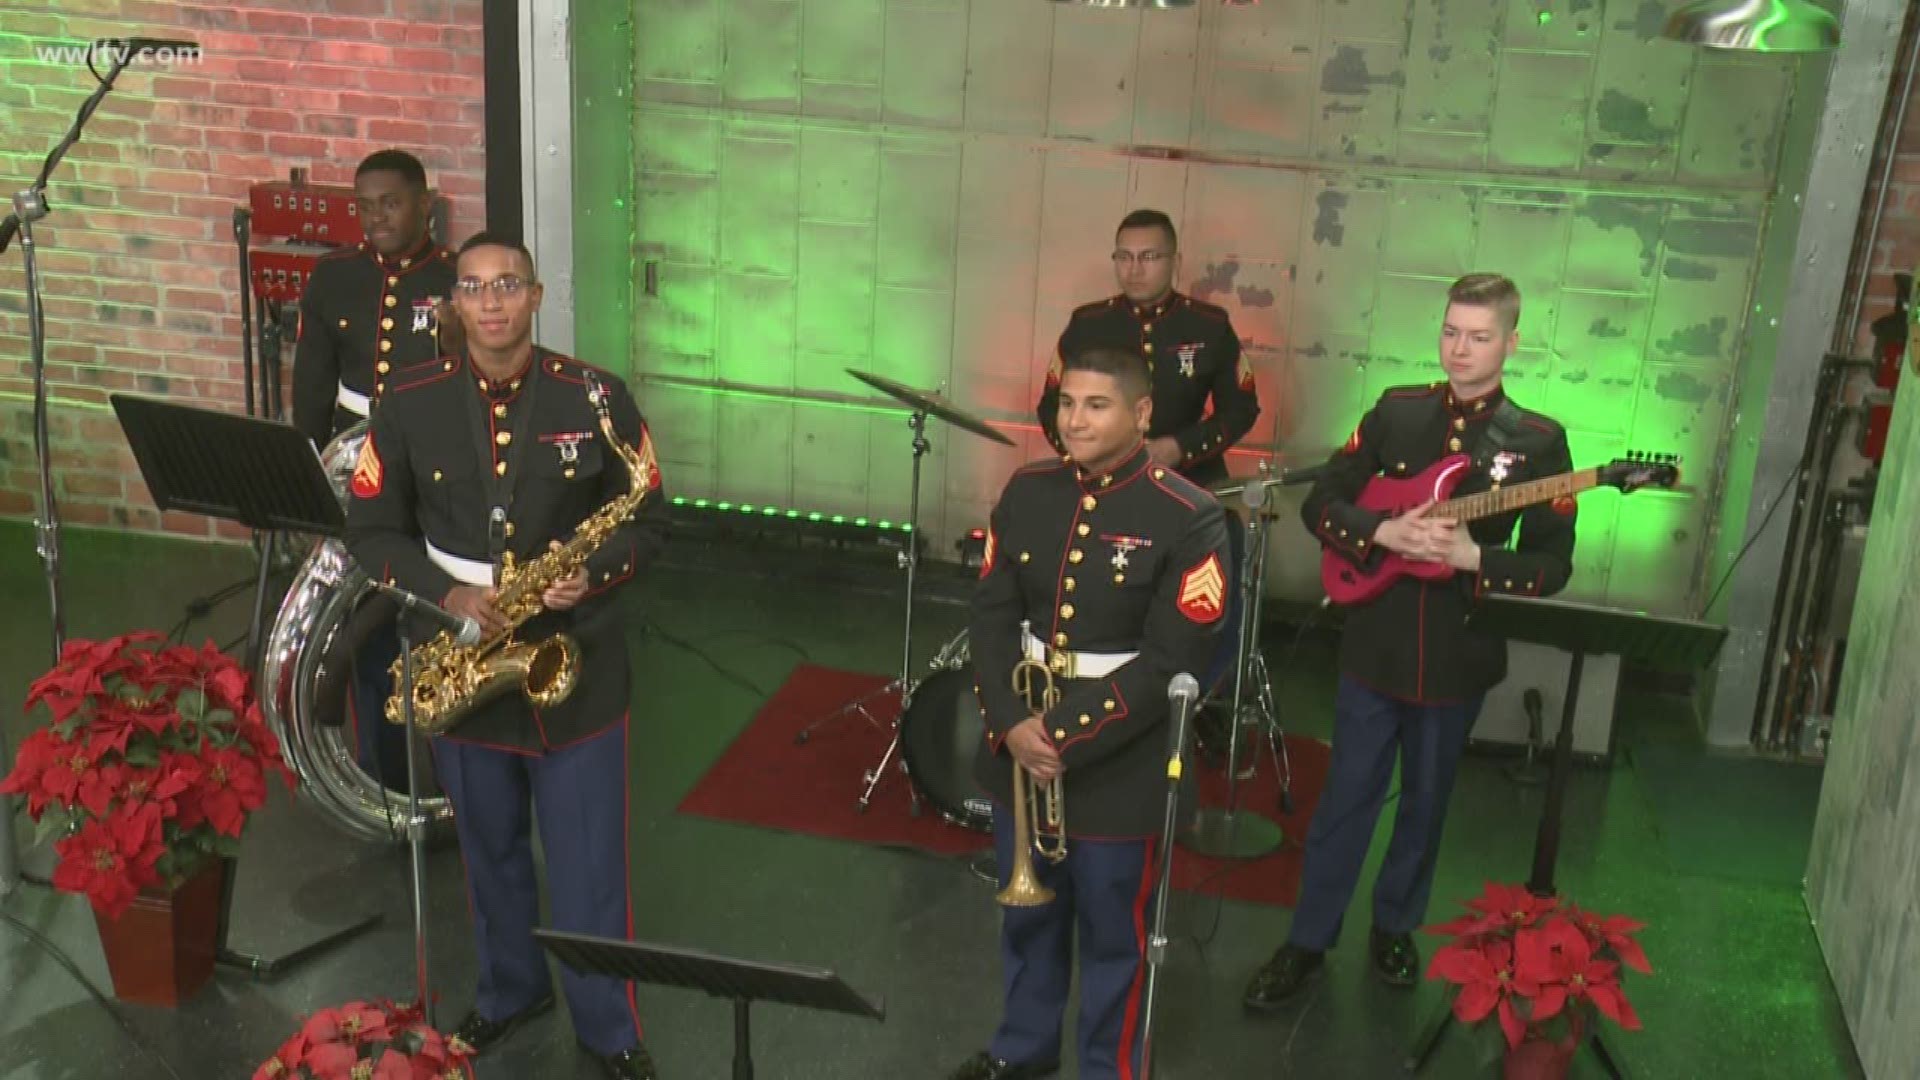 The Marine Forces Reserve Band has a list of shows for the public to come out and enjoy some great holiday music and donate toys for very deserving kids.